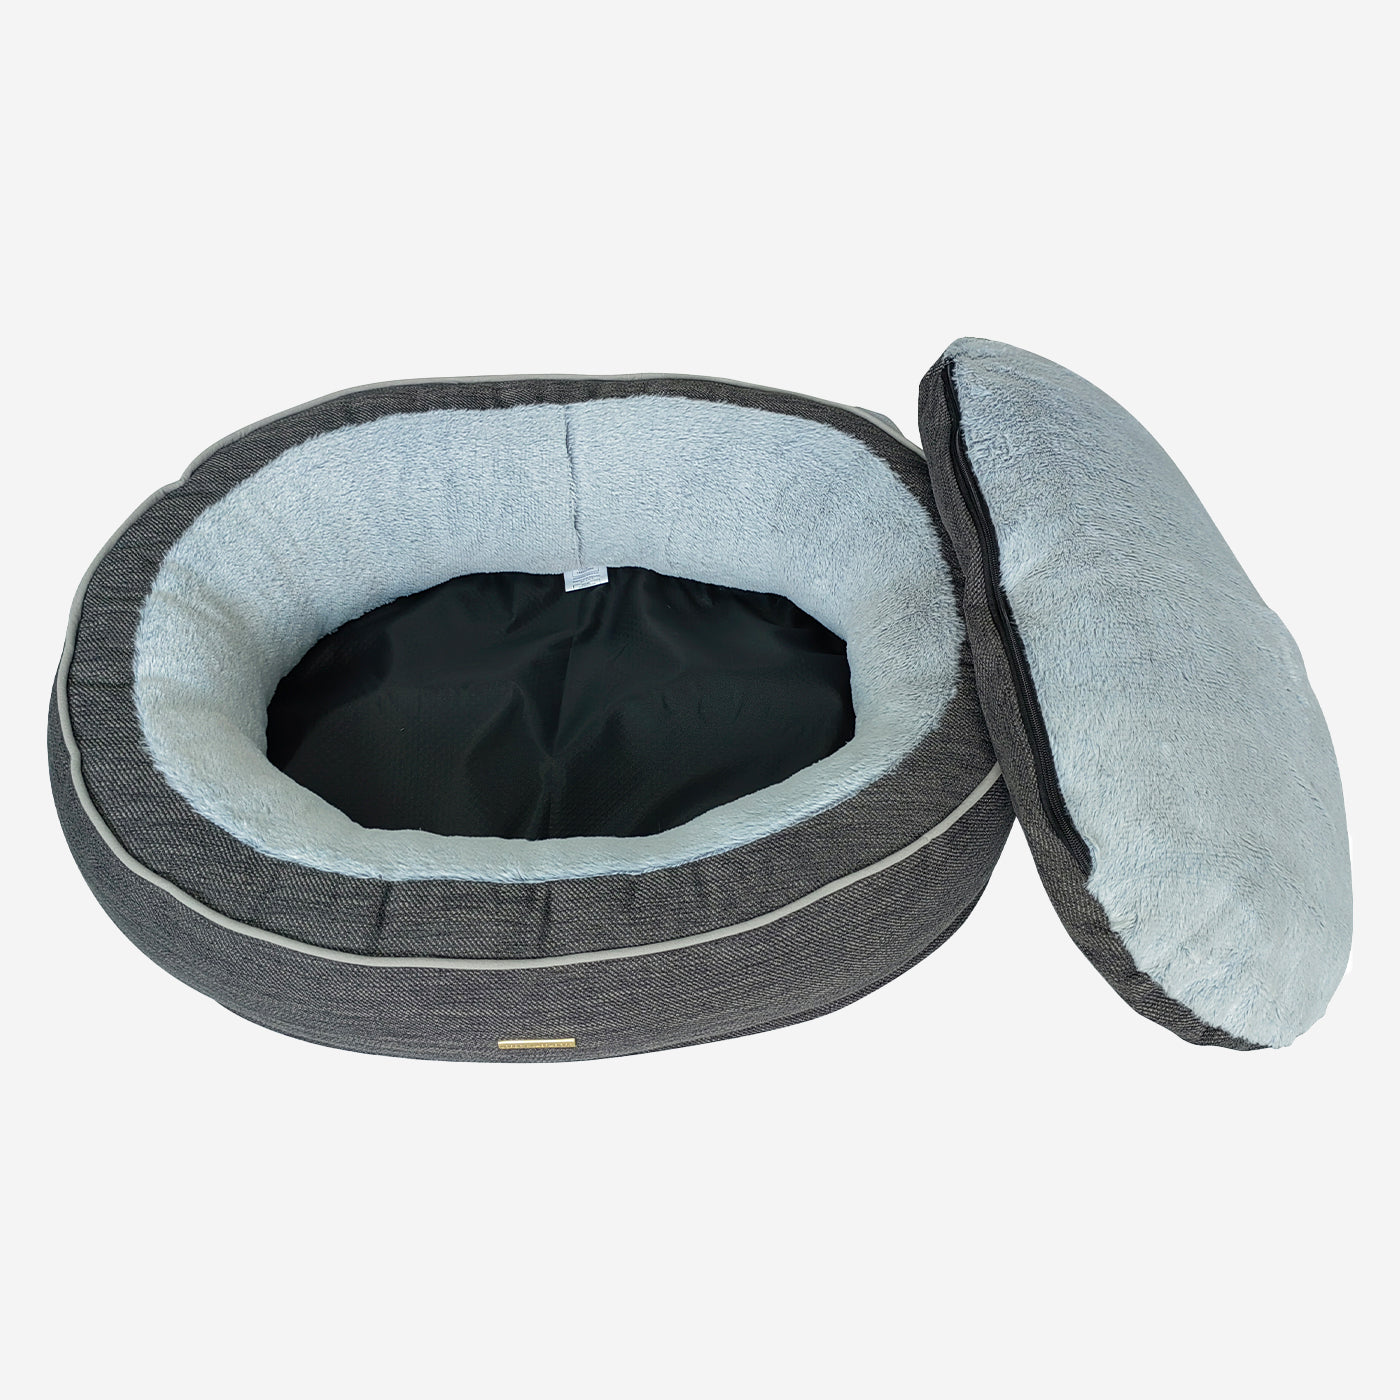 Discover Our Luxurious “The Nest” Dog Bed, Crafted Using Soft, Plush Fabric For Extra Comfort! Bringing Your Canine Companion The Perfect Bed For Dogs To Curl Up To! Available Now at Lords & Labradors US